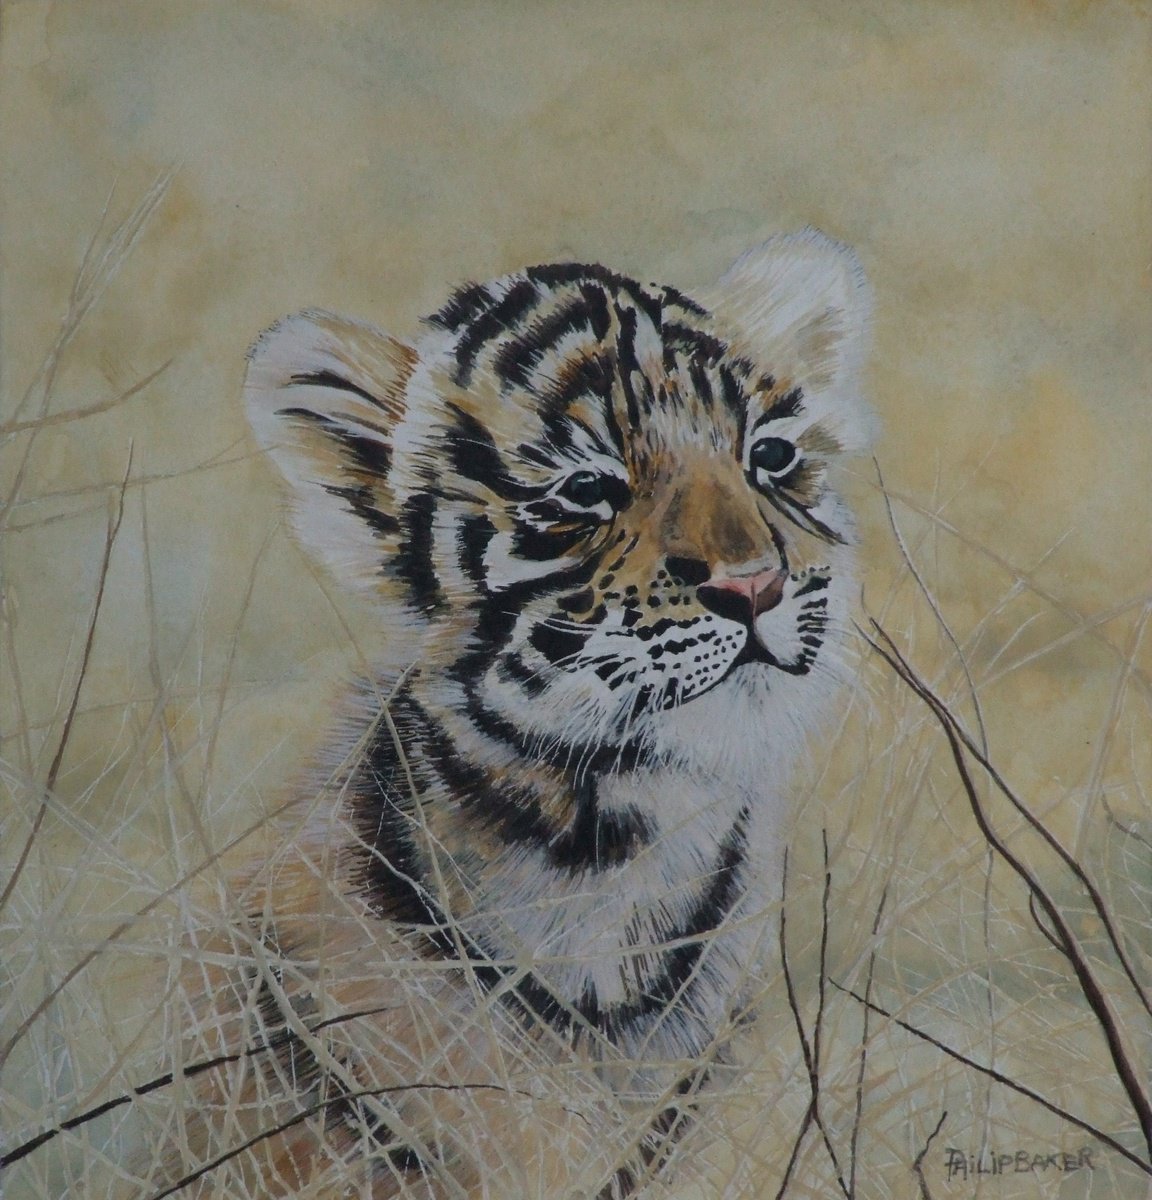 Tiger Cub by Philip Baker